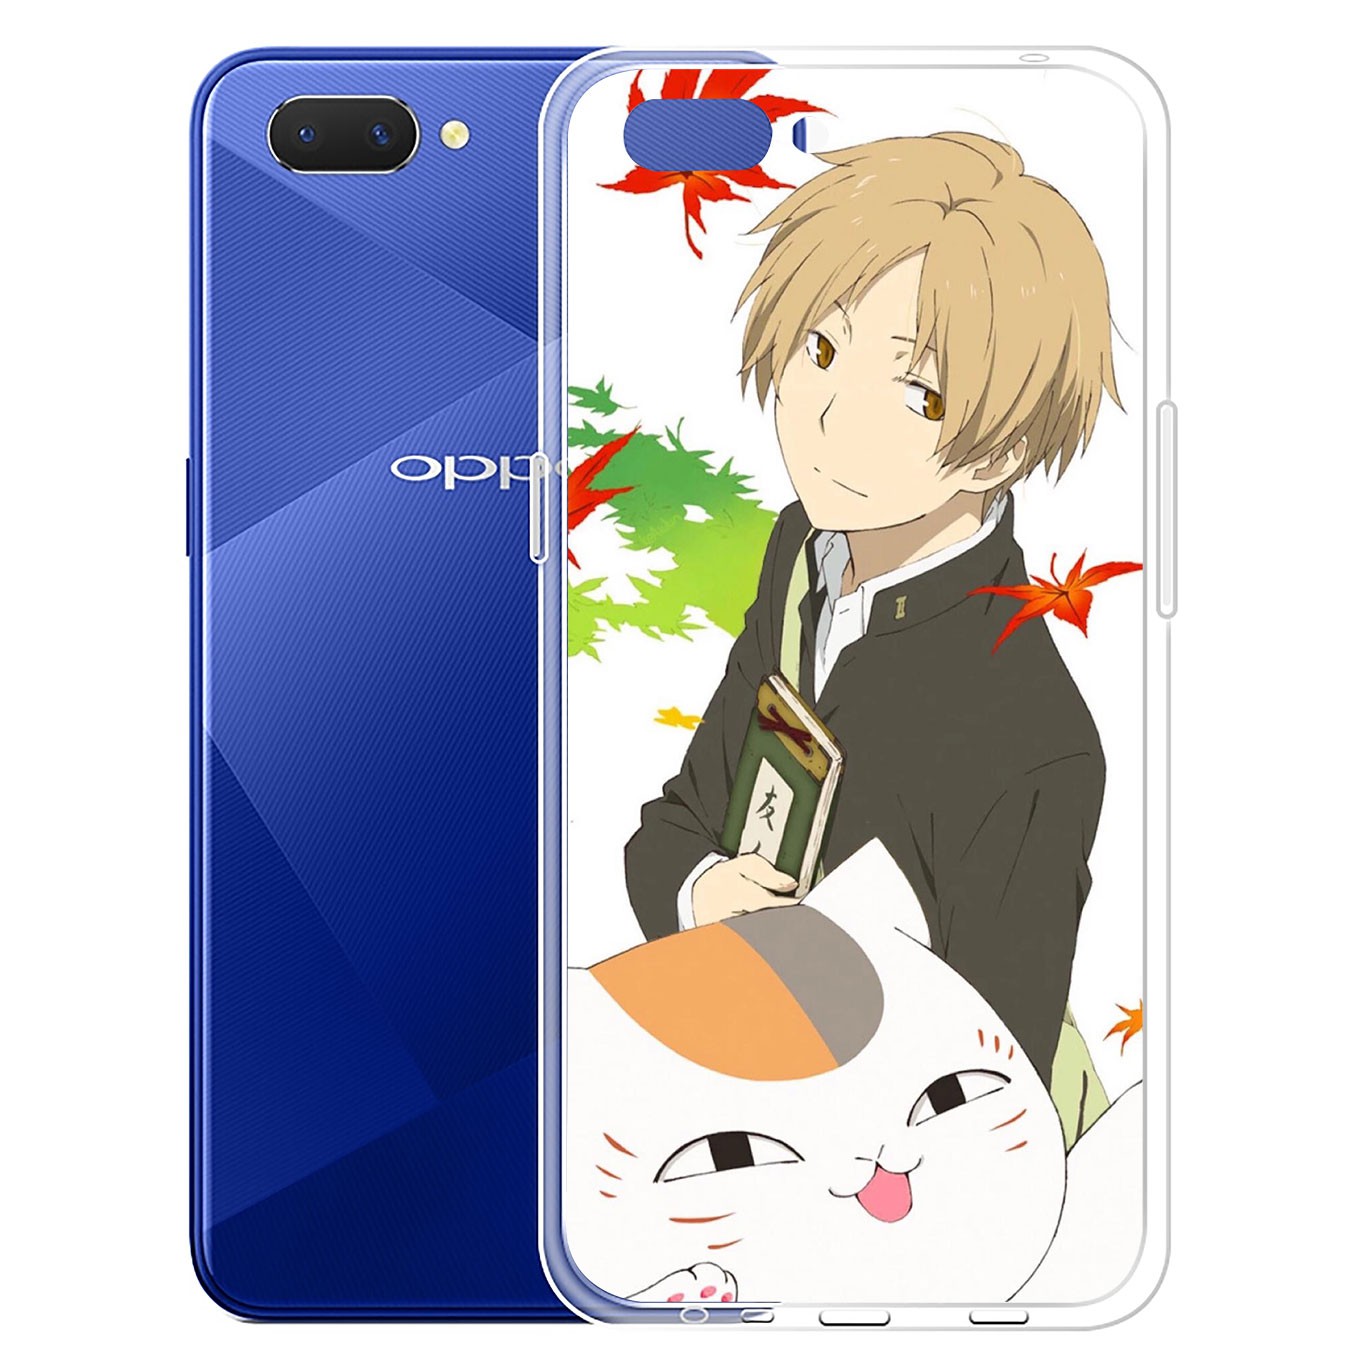 Ốp Lưng Silicone In Hình Anime Natsume Yuujinchou Cho Oppo A3S A5 A7 A37 Neo 9 A39 A57 A5S A59 A73 A77 F1S F3 F5 F7 F9 Pro A7X A9 2020